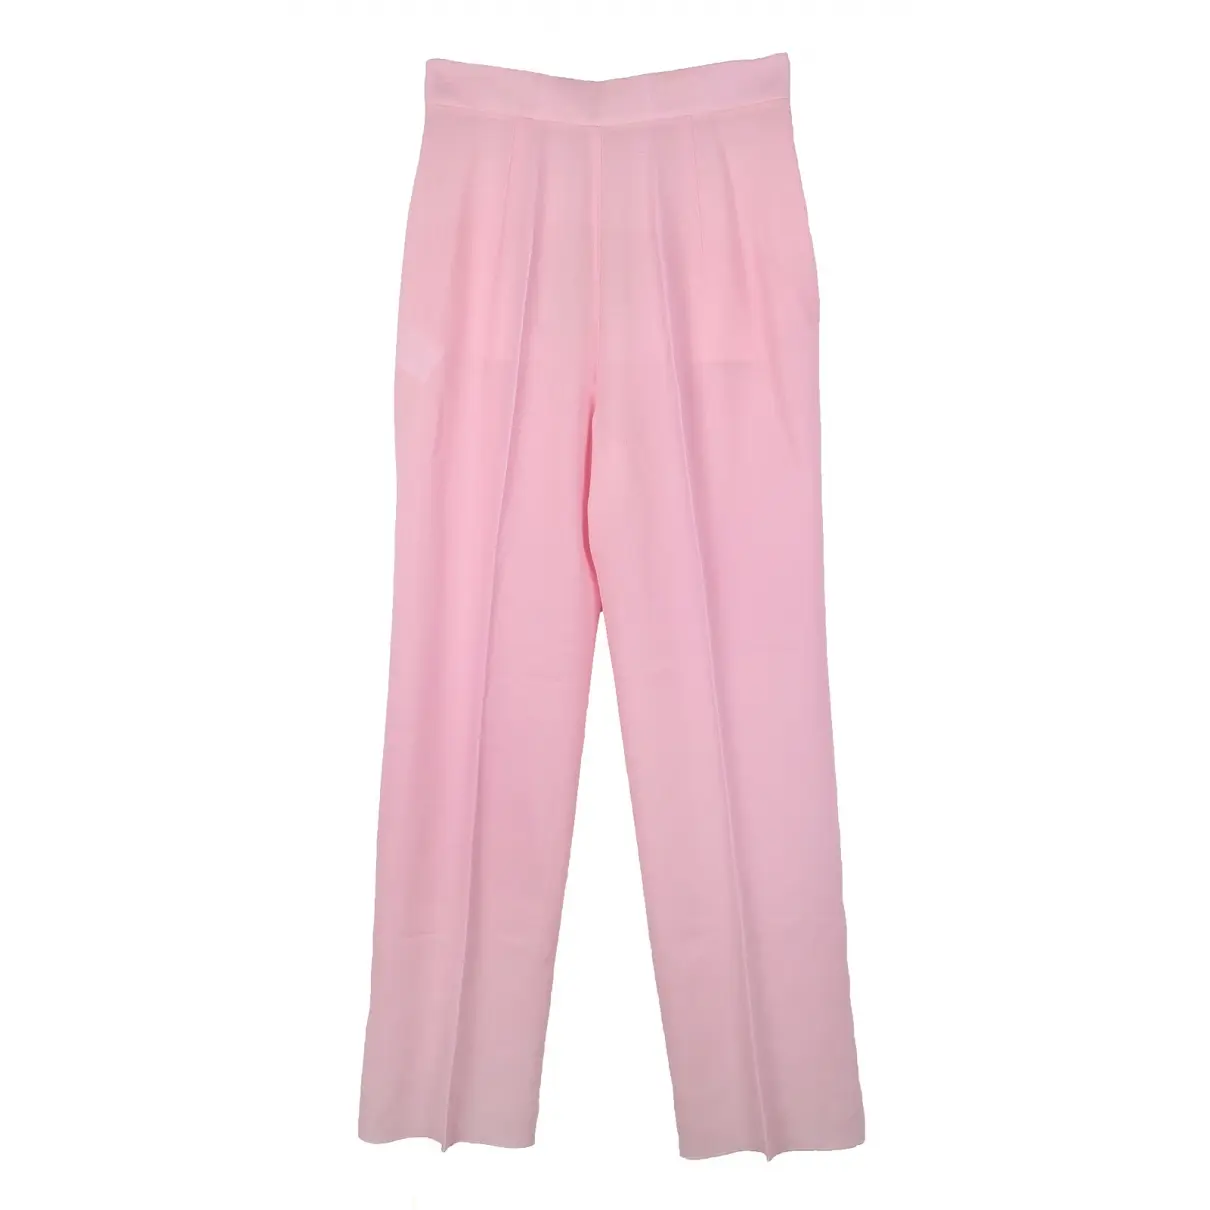 Christopher Kane Wool trousers for sale